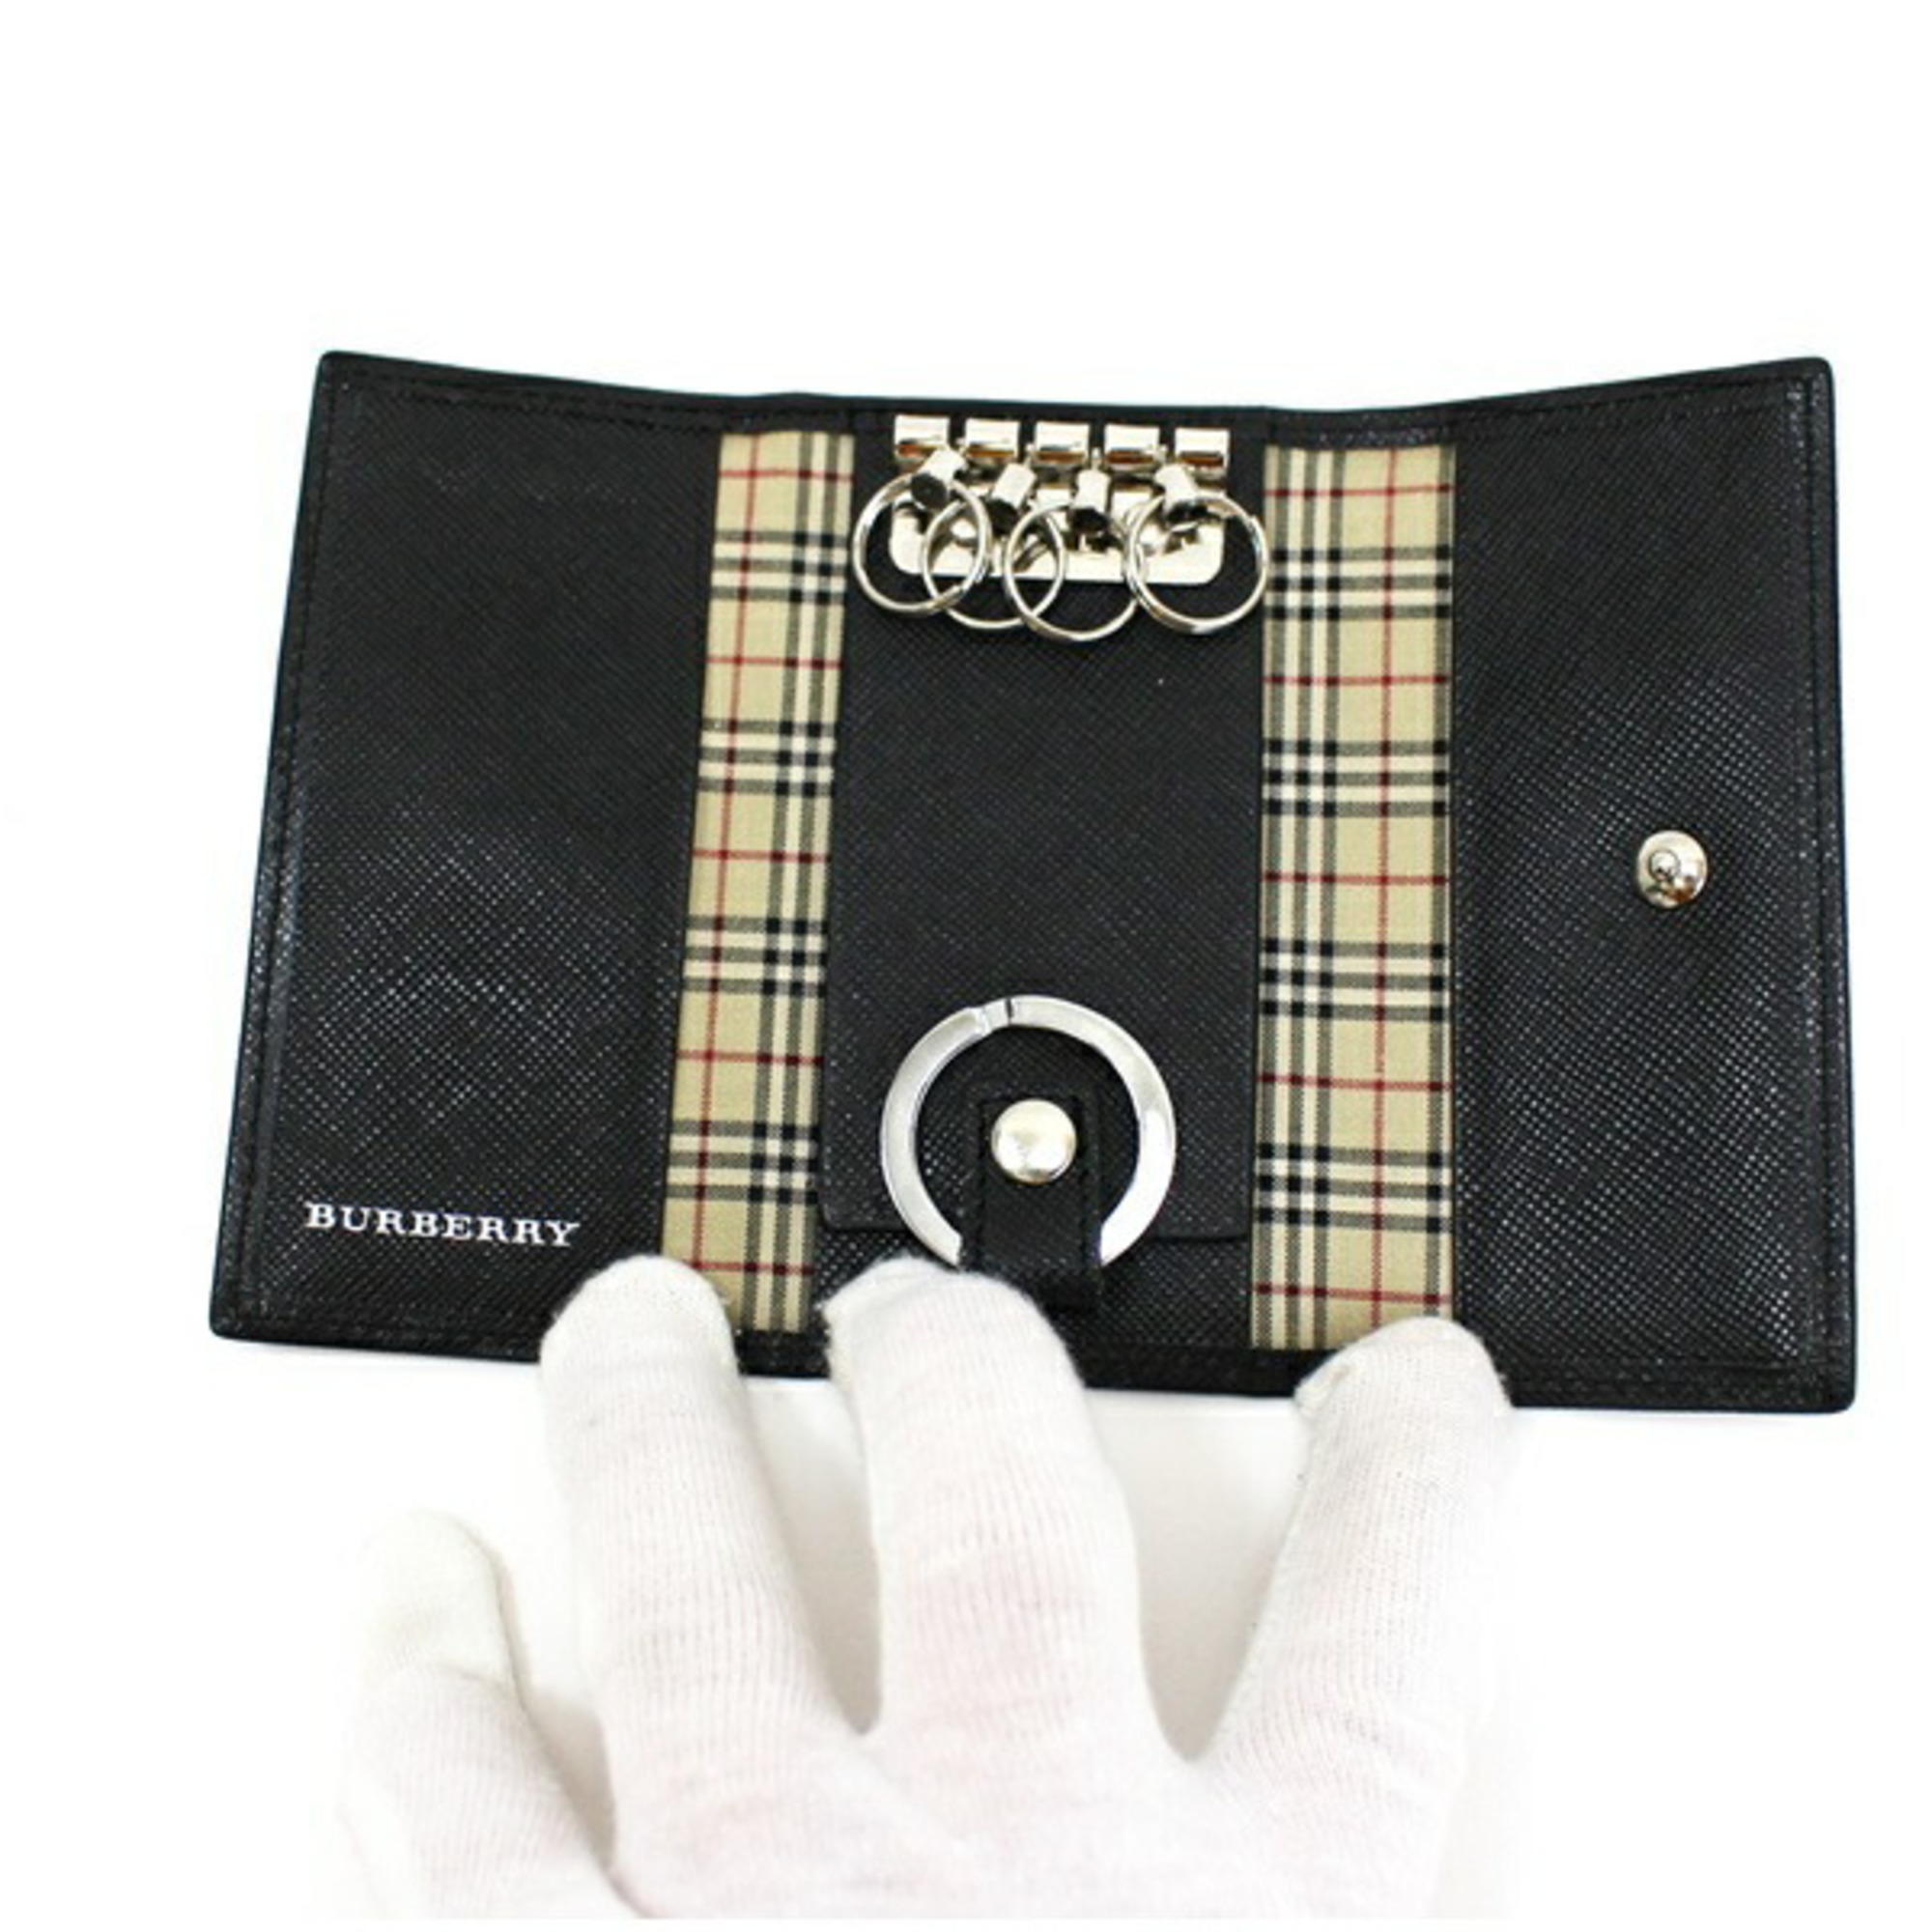 Burberry 4 row key case black embossed leather BURBERRY